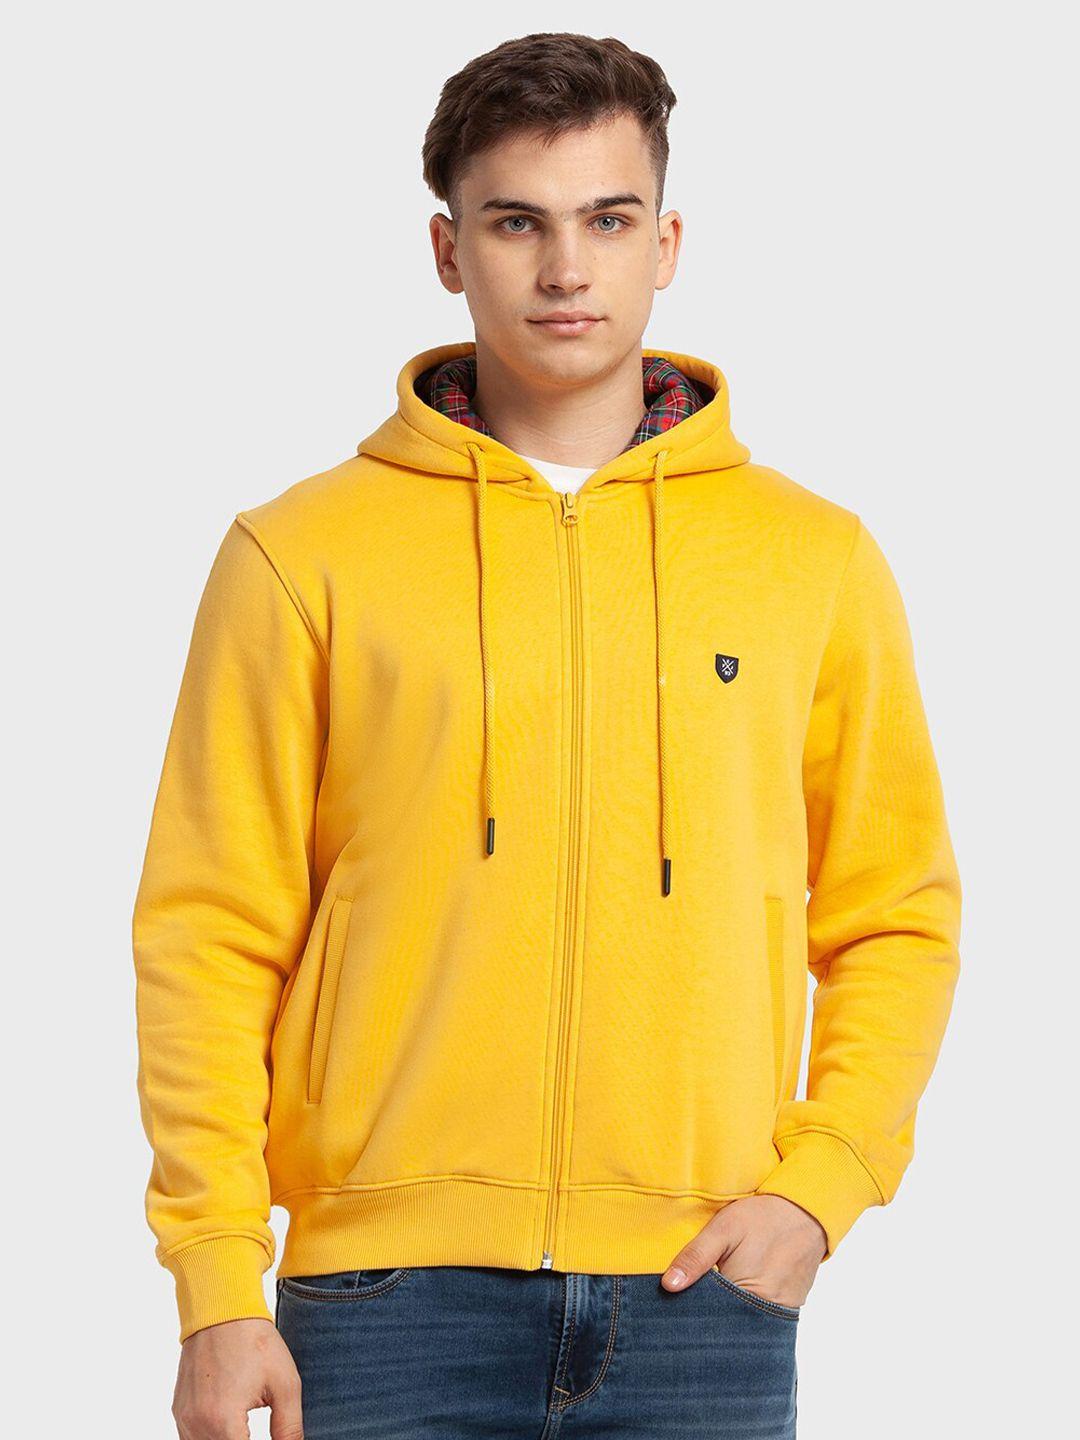 colorplus-men-hooded-inserted-pockets-knitted-front-open-sweatshirt